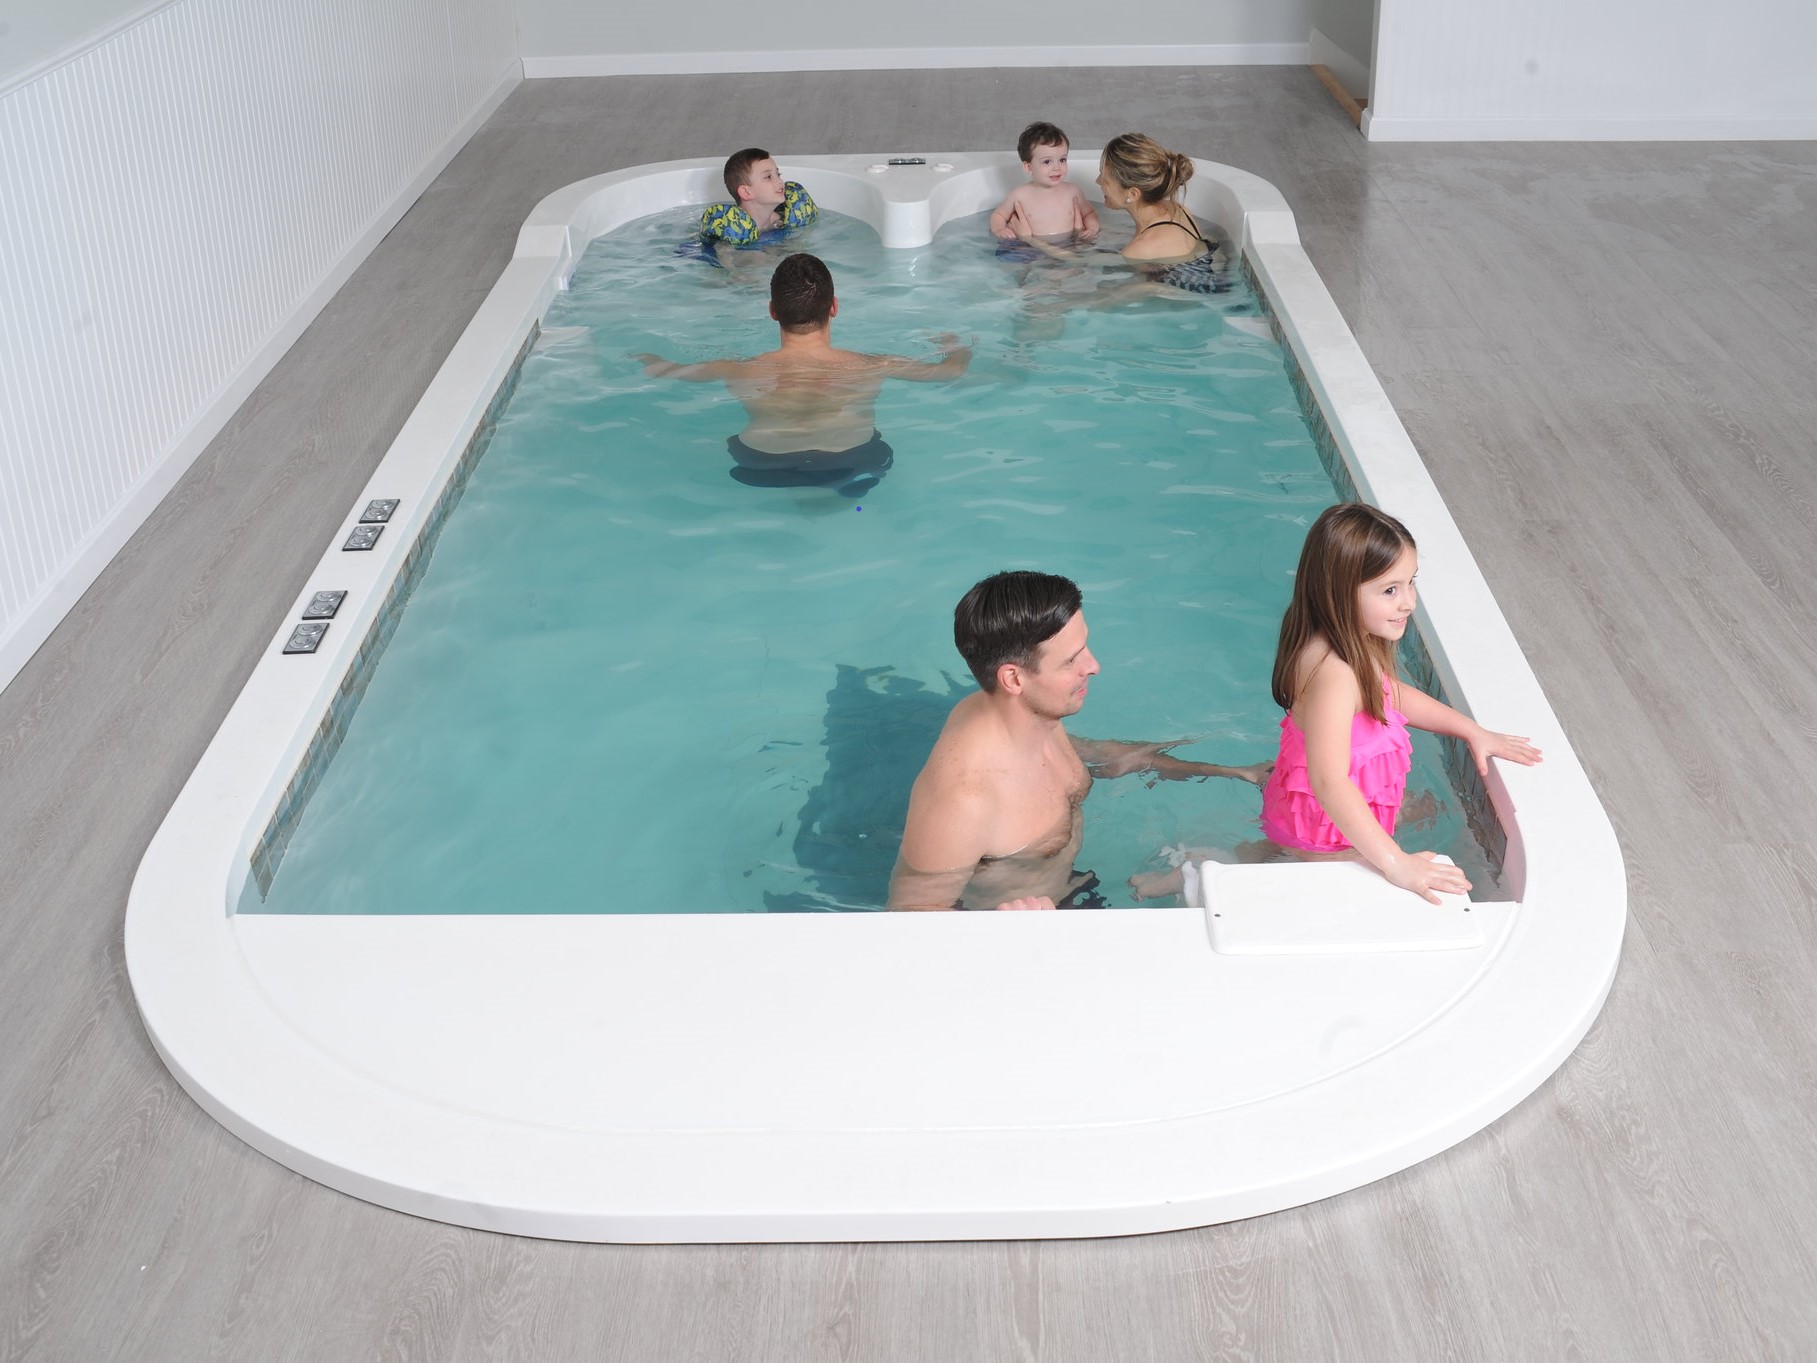 Lap Pools - Therapy & Fitness Pools - For Home